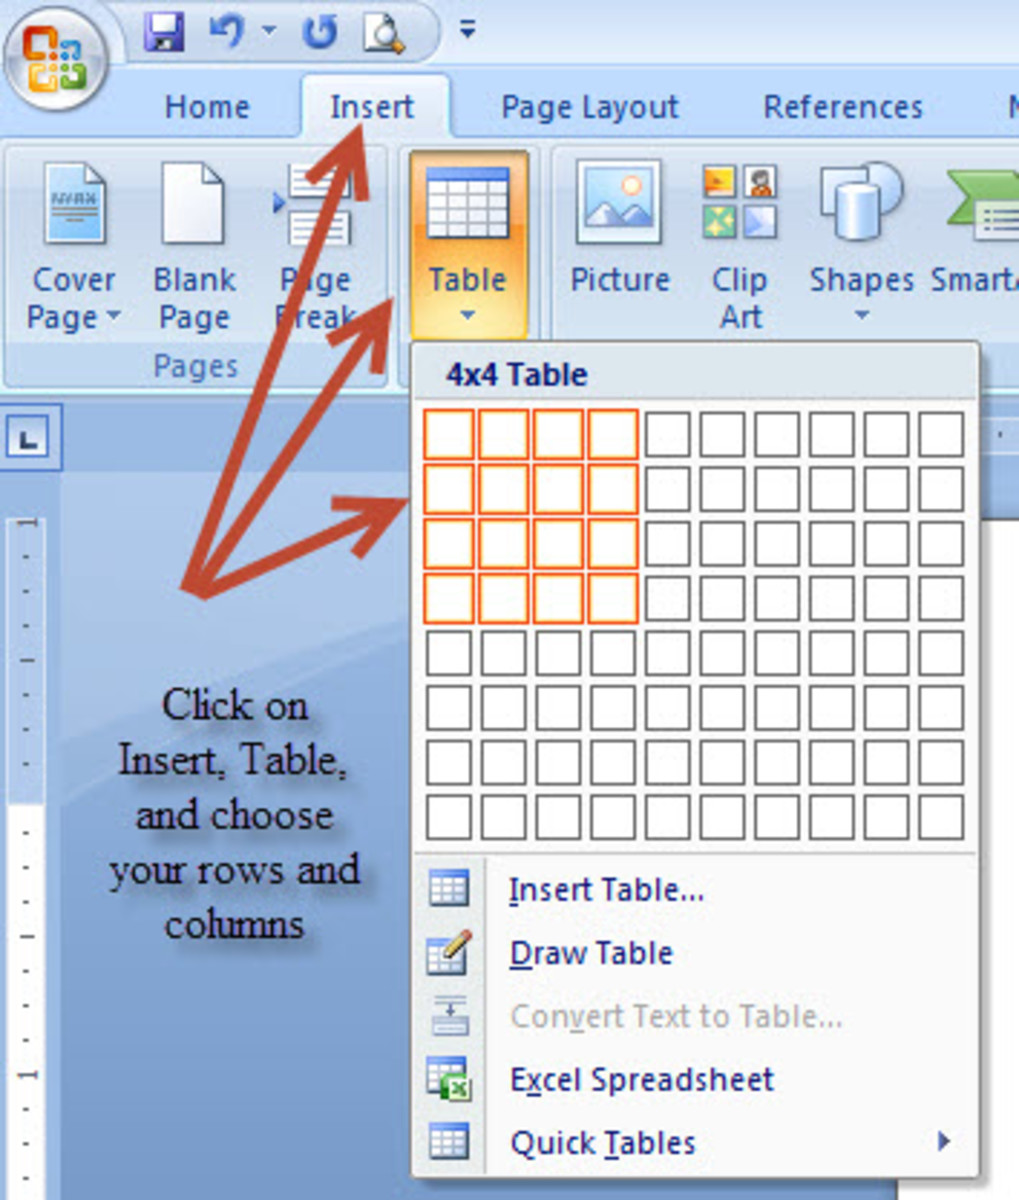 Step 1.  Decide how many columns and rows will be needed. Click on Insert, Table, and choose the number of columns and rows needed.